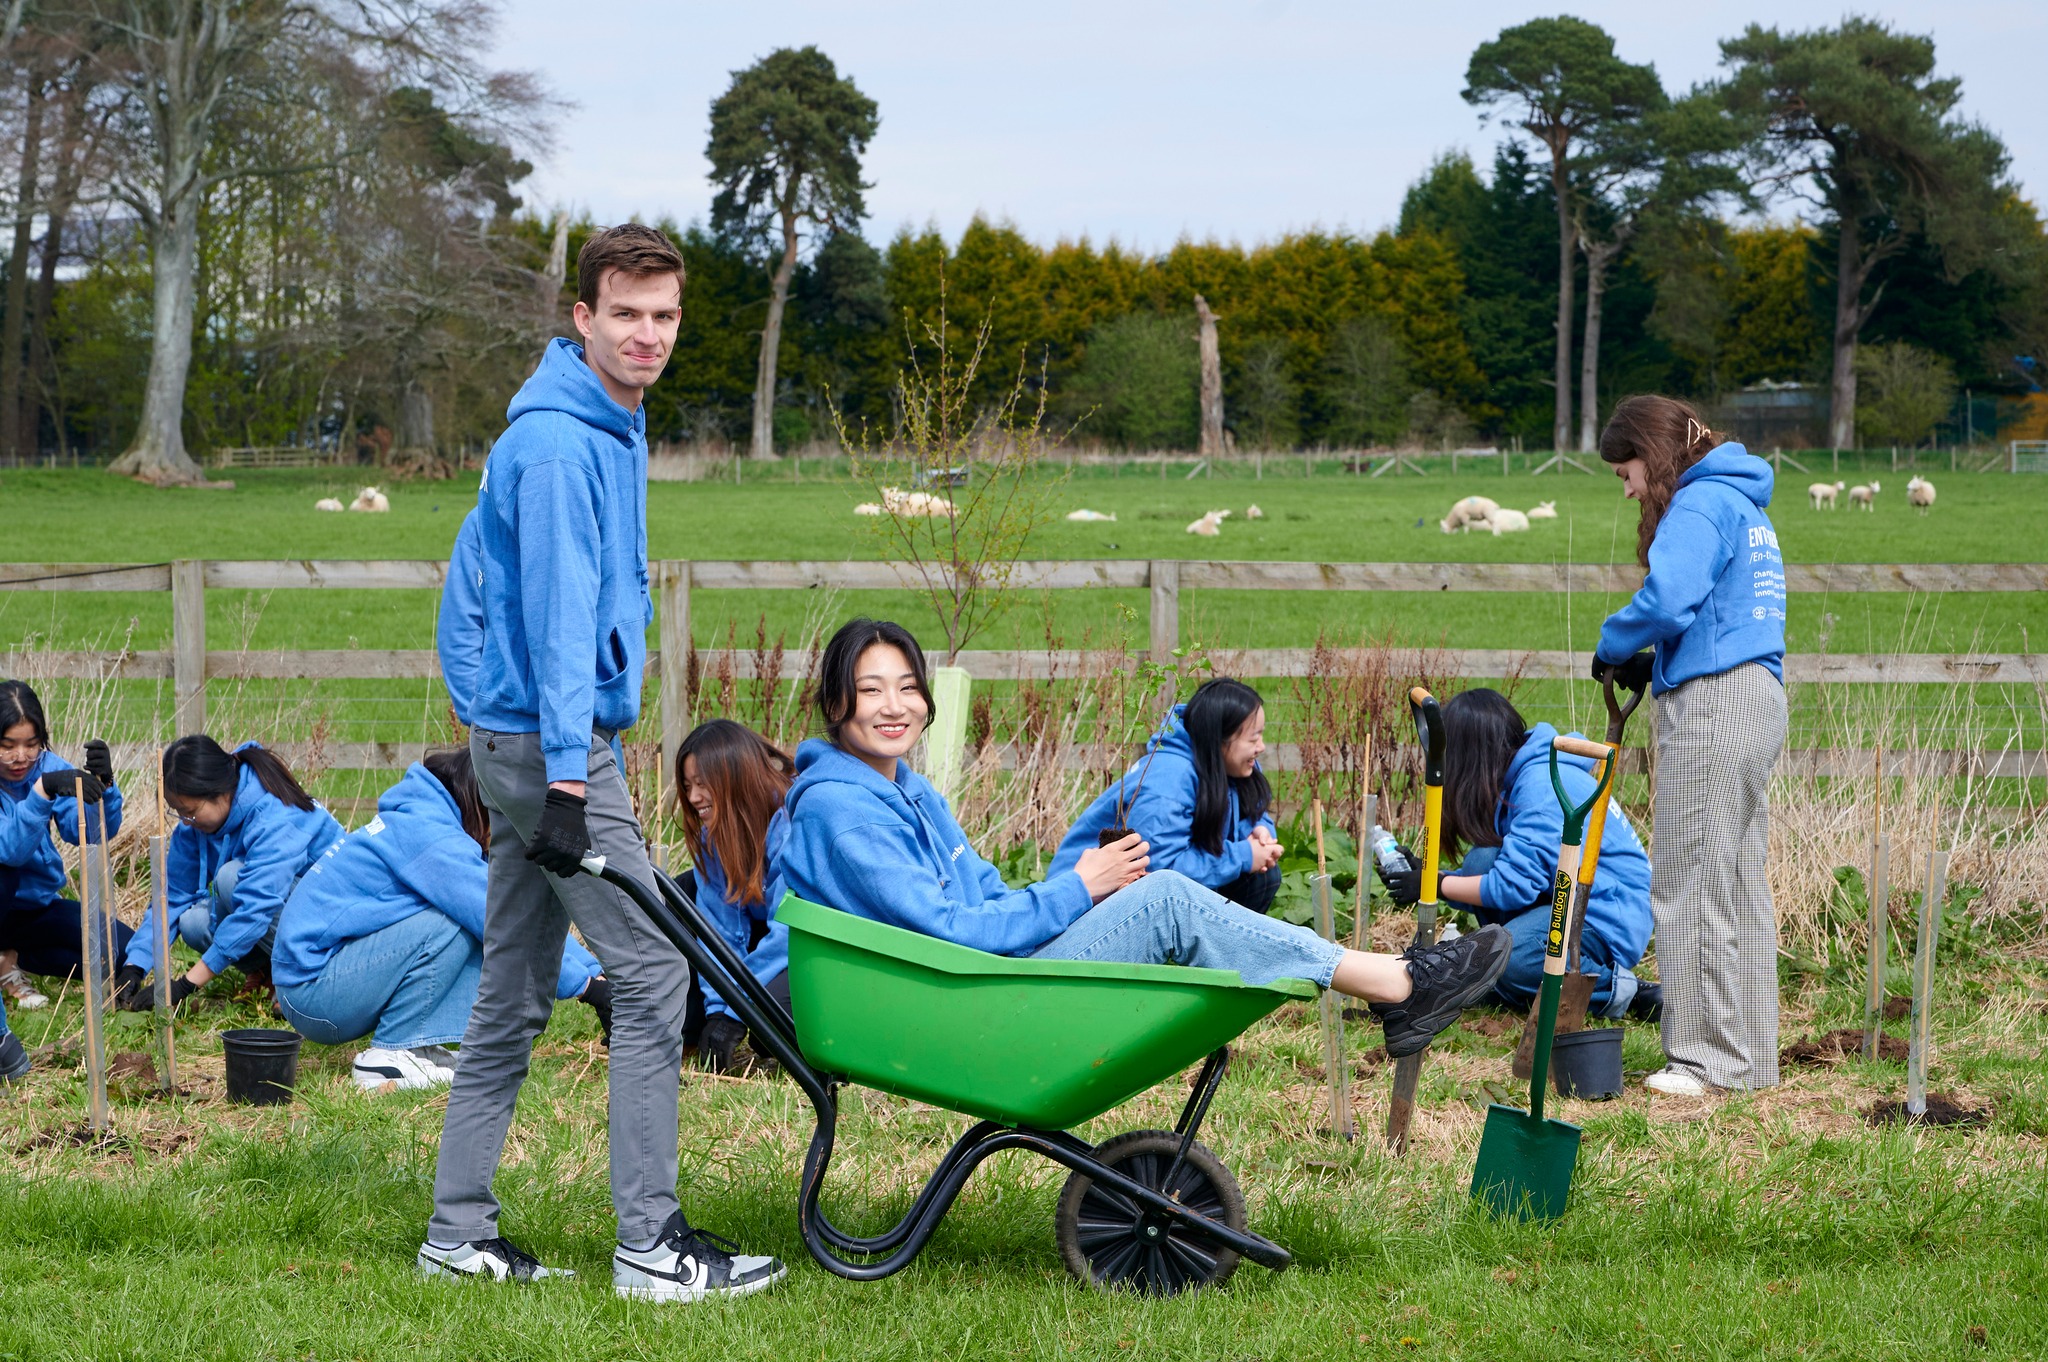 People planting trees with girl being pushed in a wheel barrow